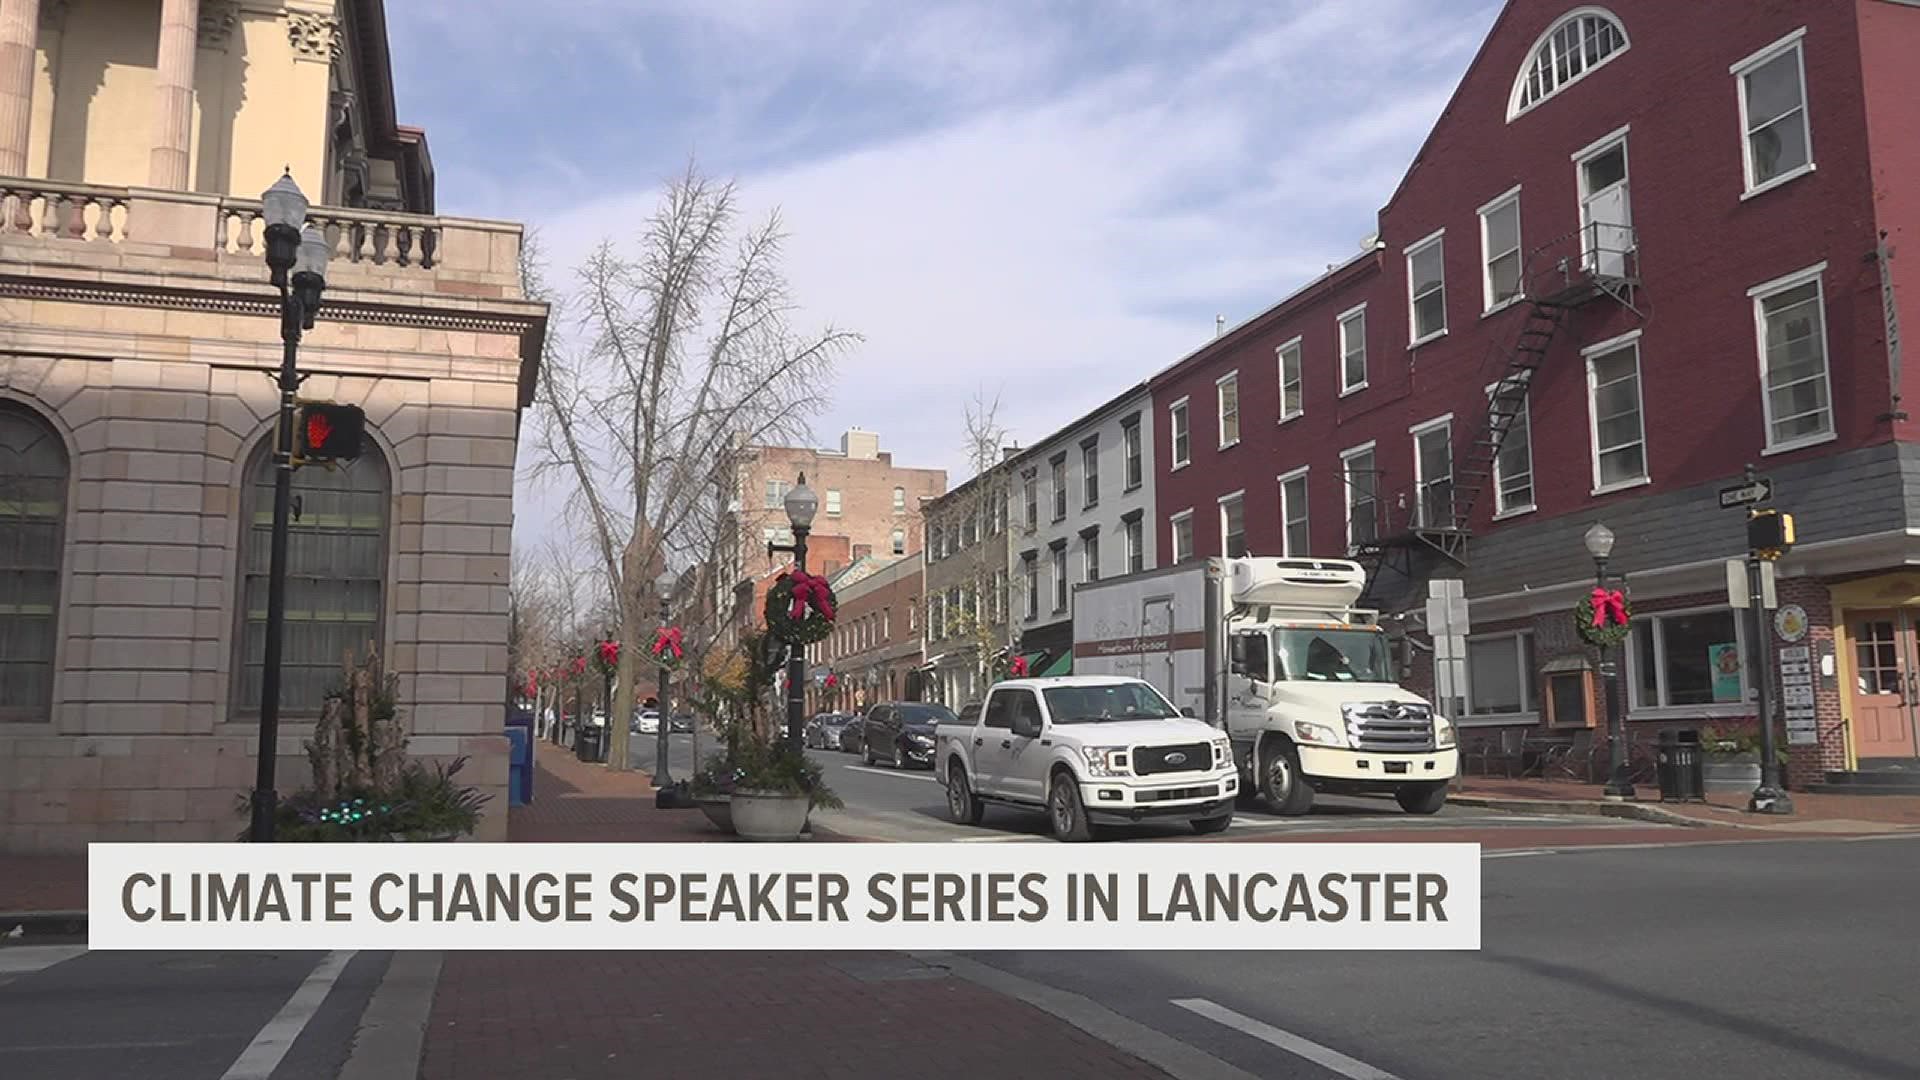 The event, which will take place on Sunday in Lancaster, will highlight a variety of speakers discussing climate issues and solutions in our area.